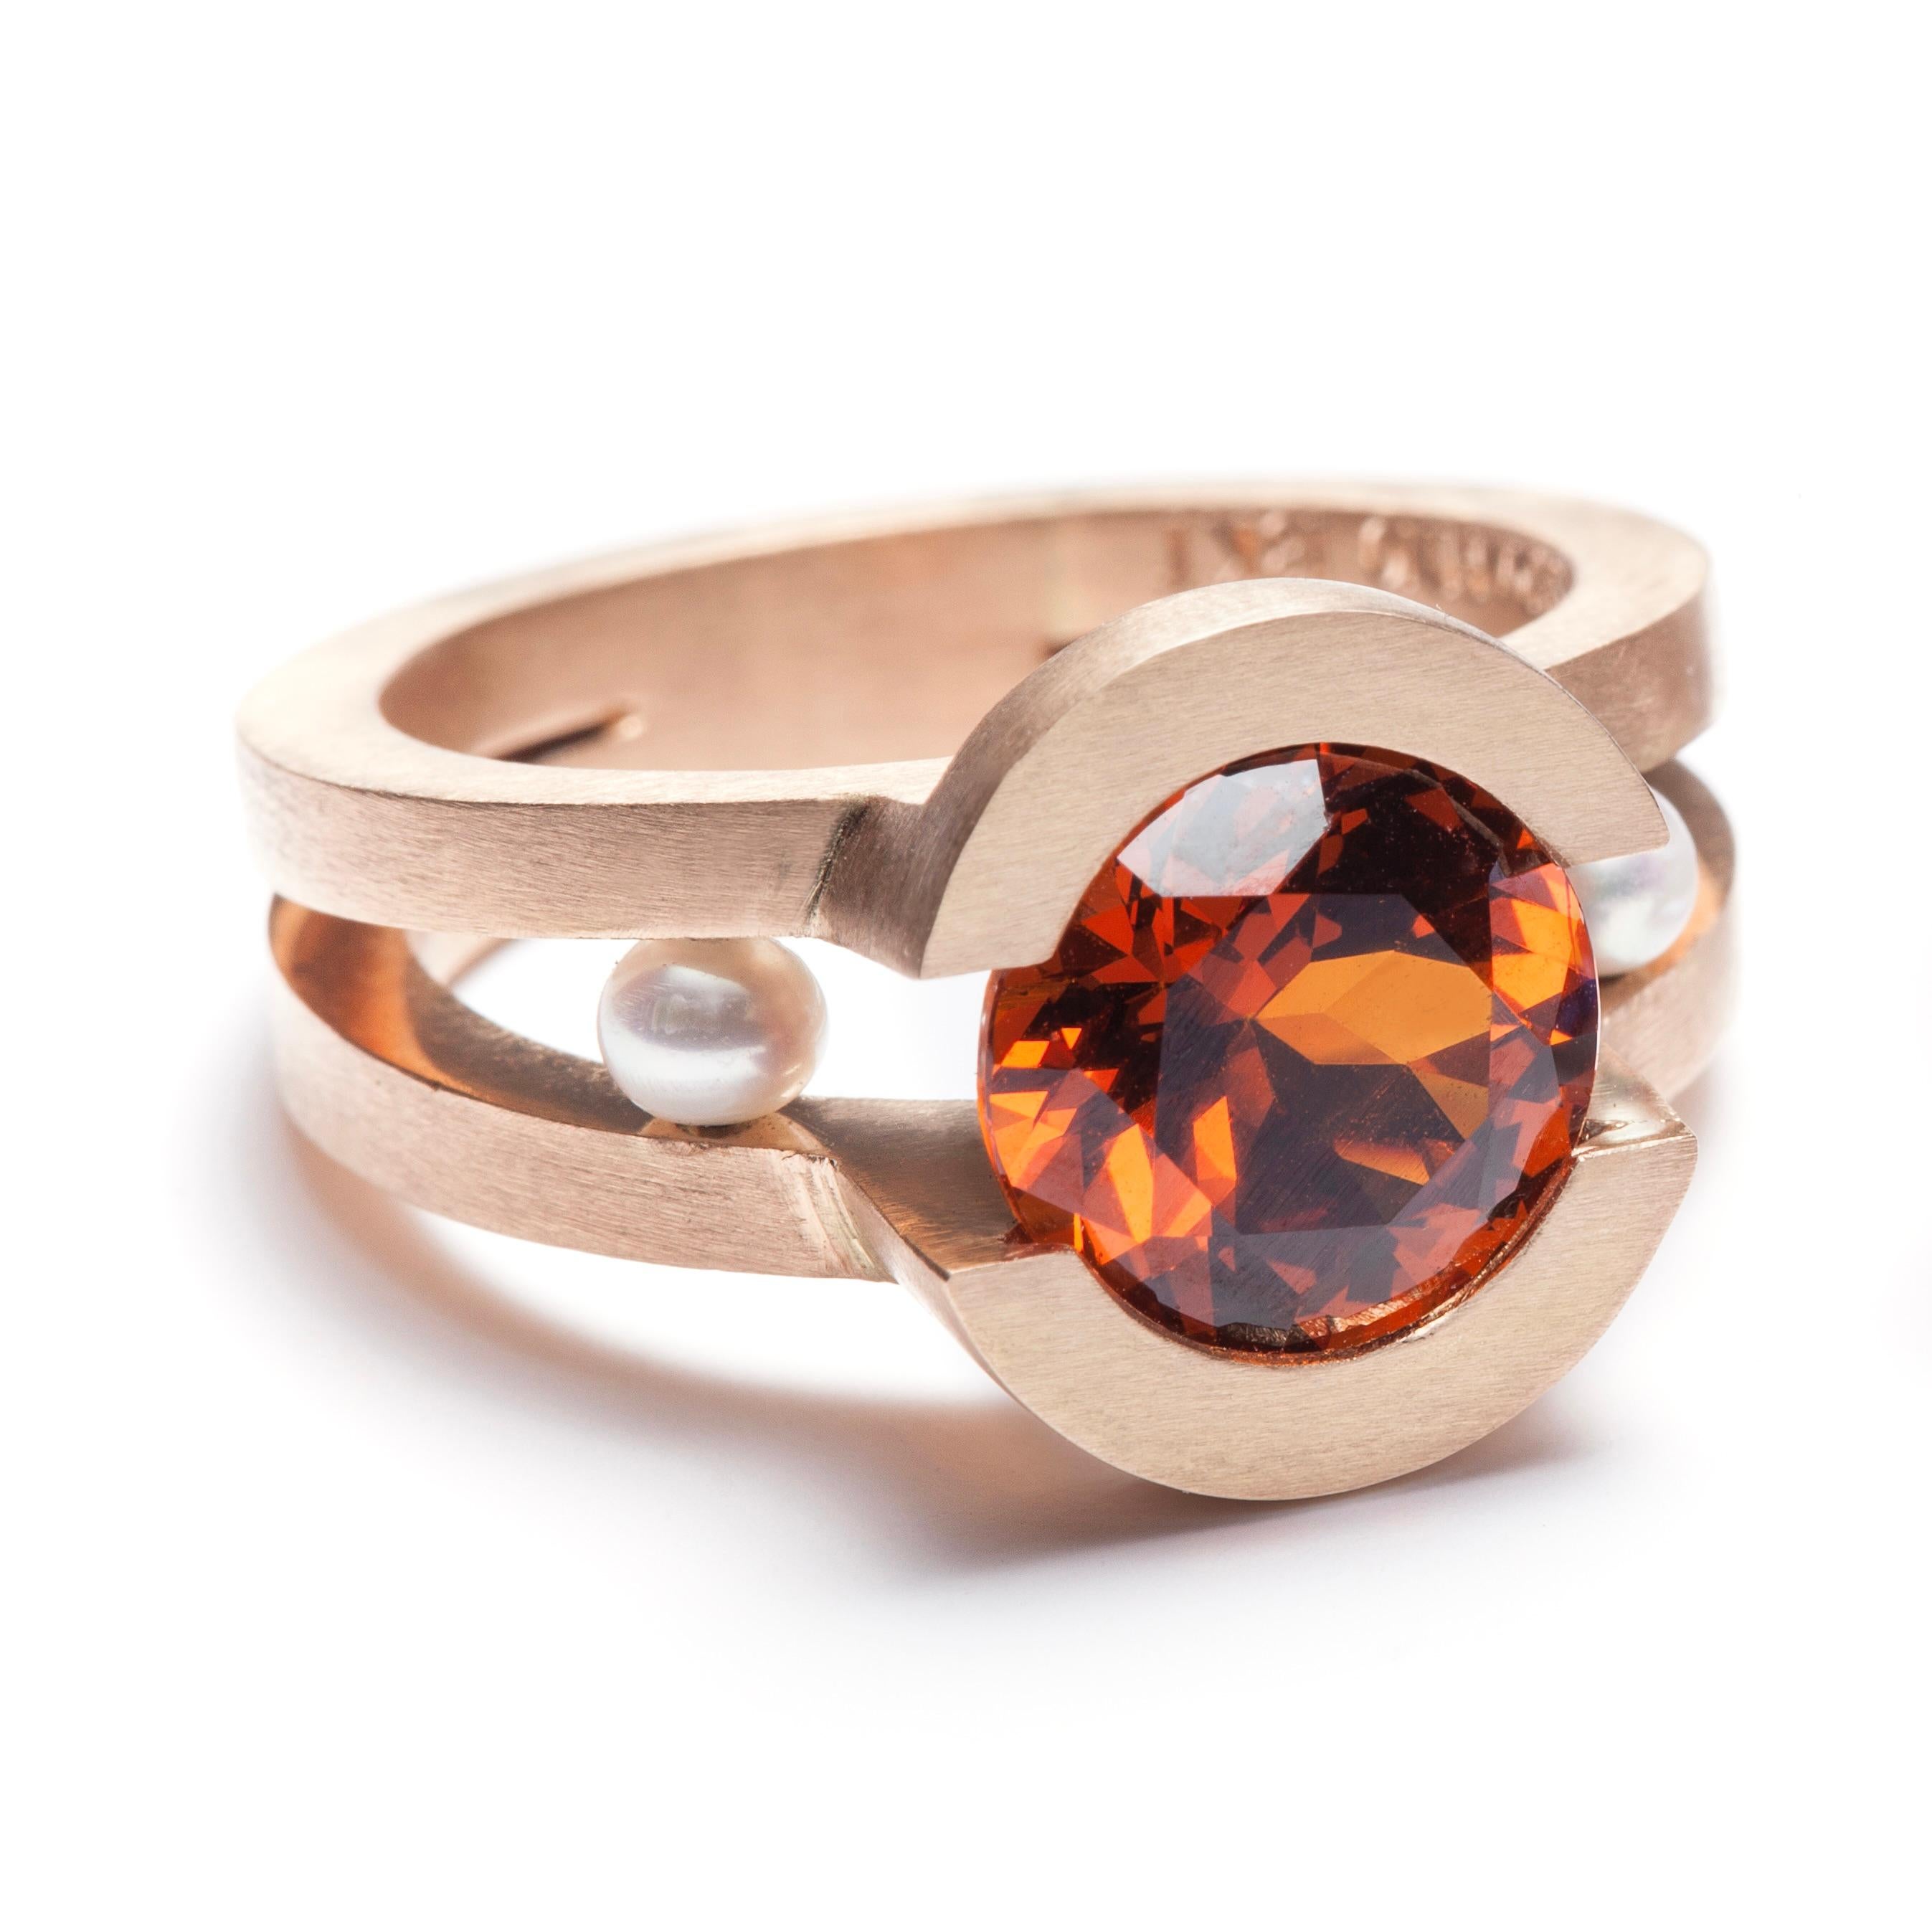 THOLOS Ring in 18kt Pink Gold set with Spessartite Garnet and Pearls by Serafino.

This ring is completely hand forged in 18kt pink gold set with a fiery 3.5 carat spessartite garnet and freshwater pearls. The orangey color of our in-house pink gold